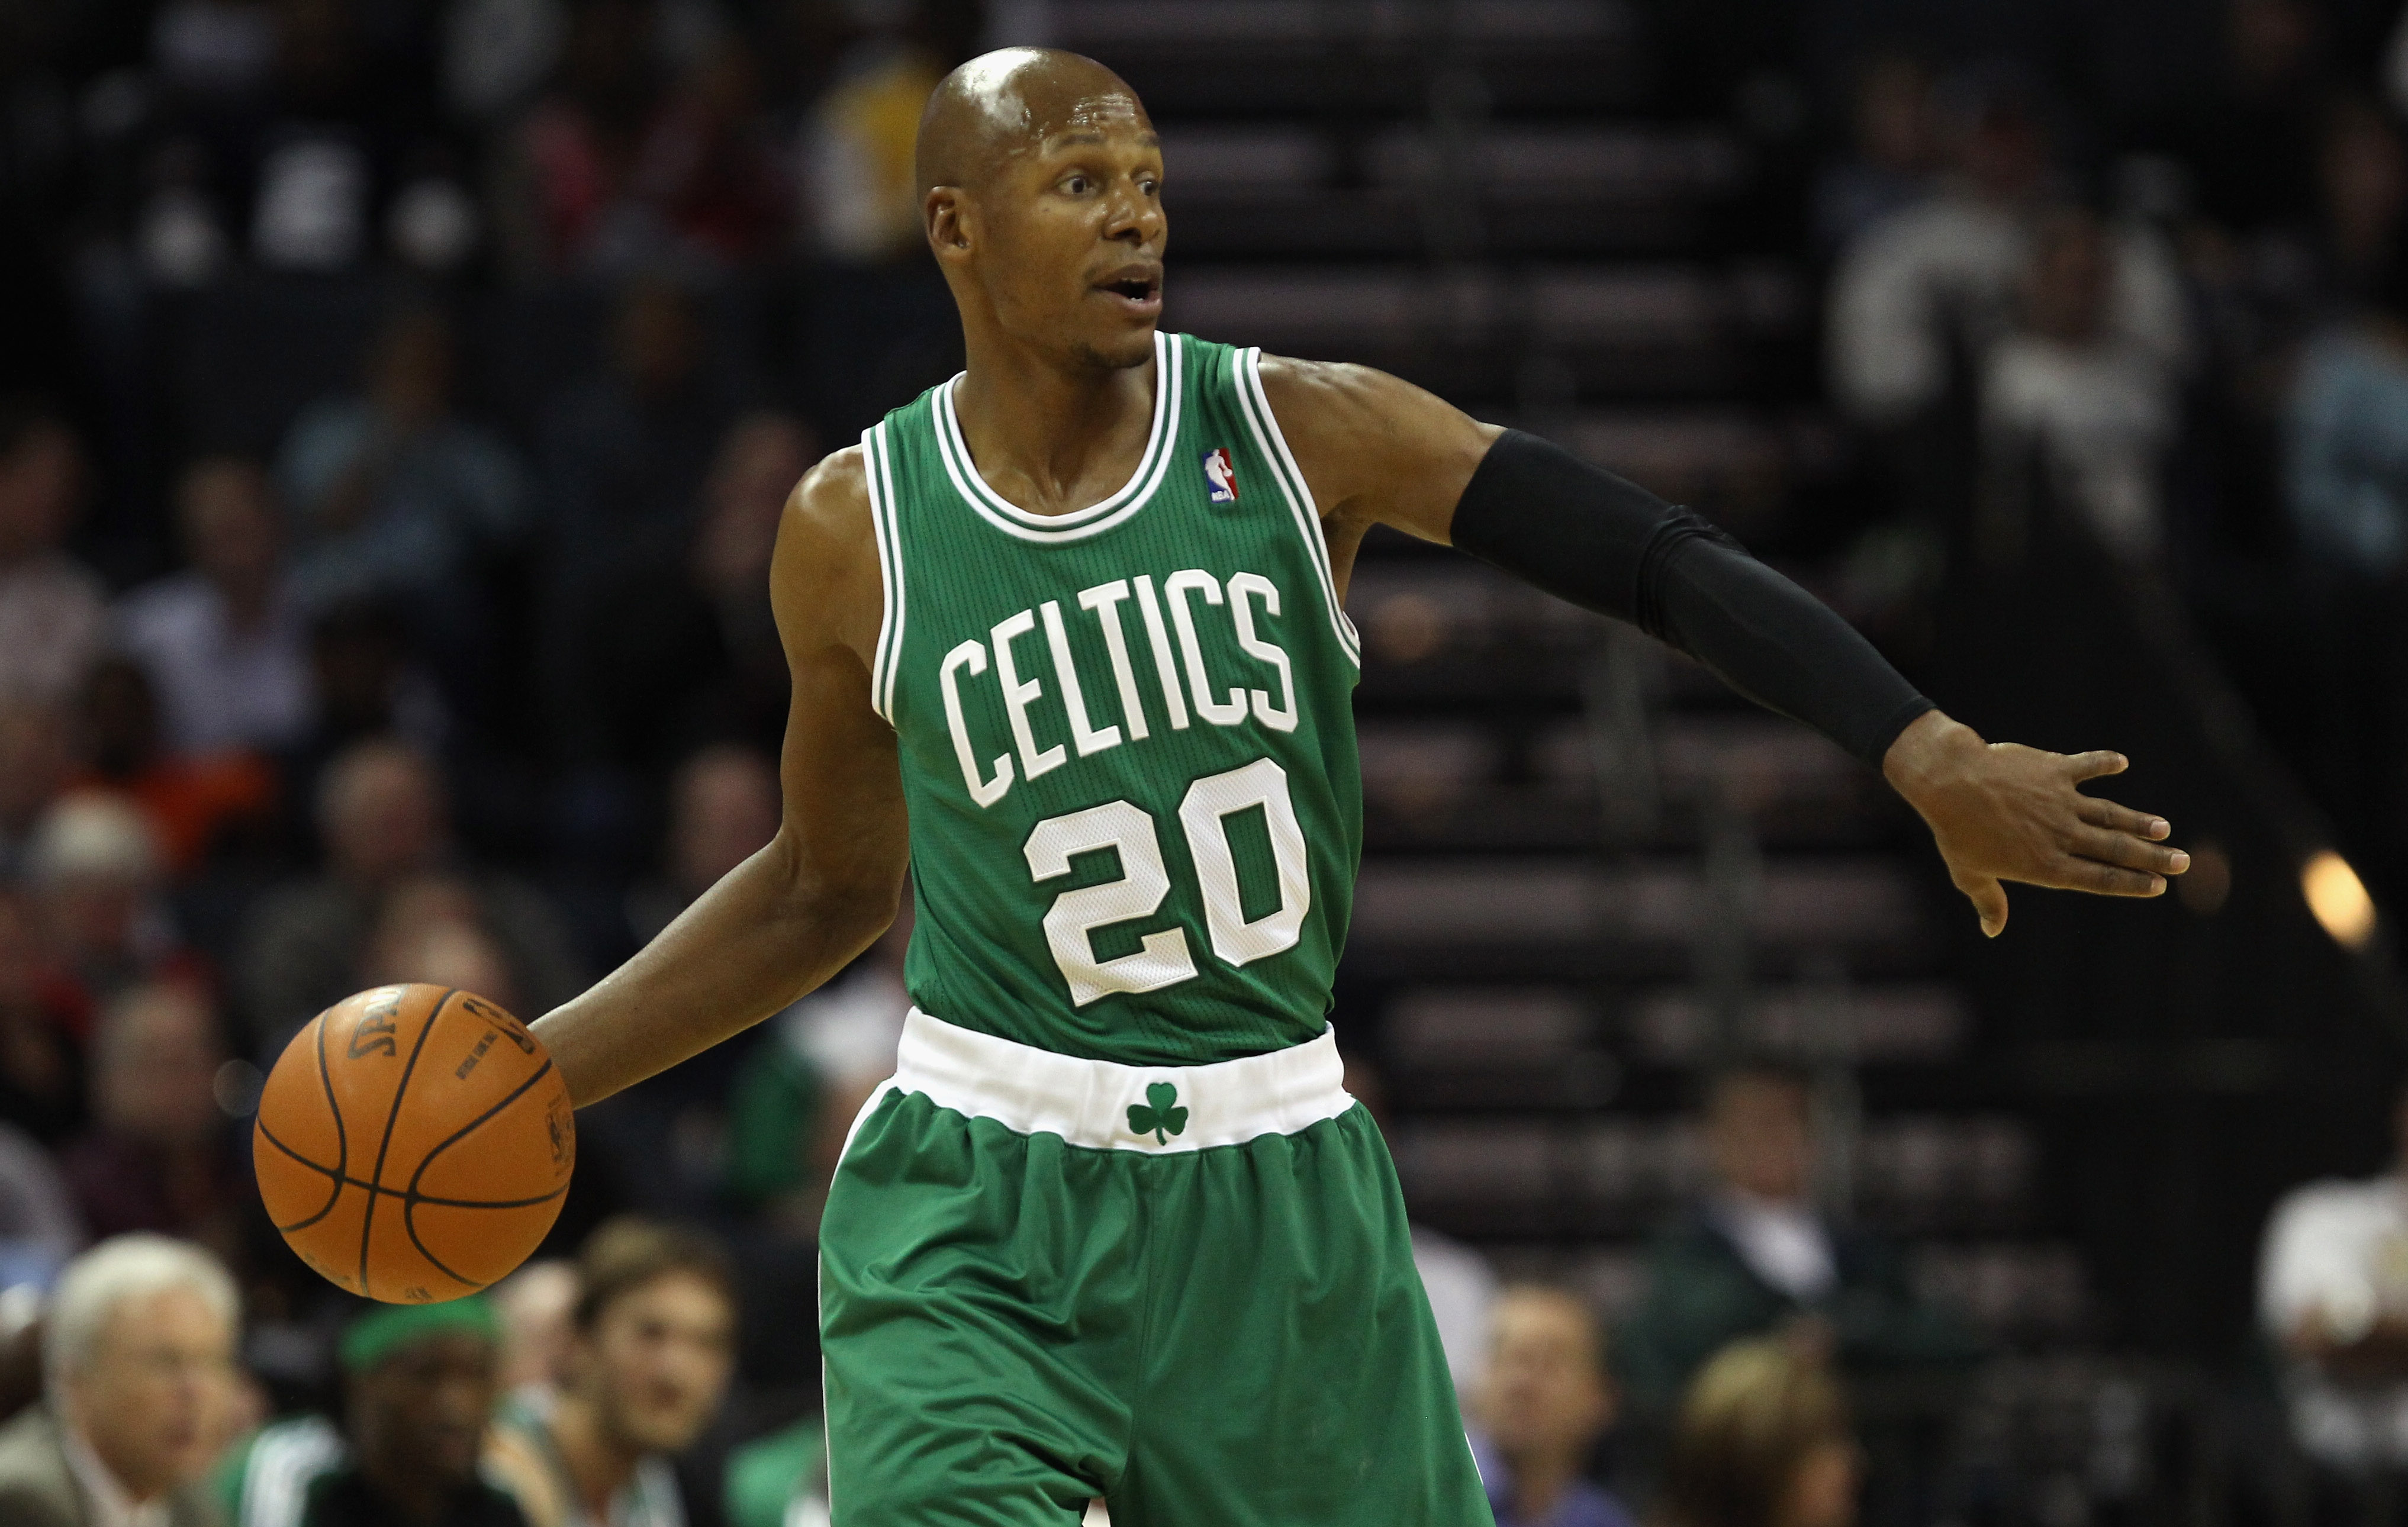 CHARLOTTE, NC - DECEMBER 11:  Ray Allen #20 of the Boston Celtics calls a play against the Charlotte Bobcats during their game at Time Warner Cable Arena on December 11, 2010 in Charlotte, North Carolina. NOTE TO USER: User expressly acknowledges and agre